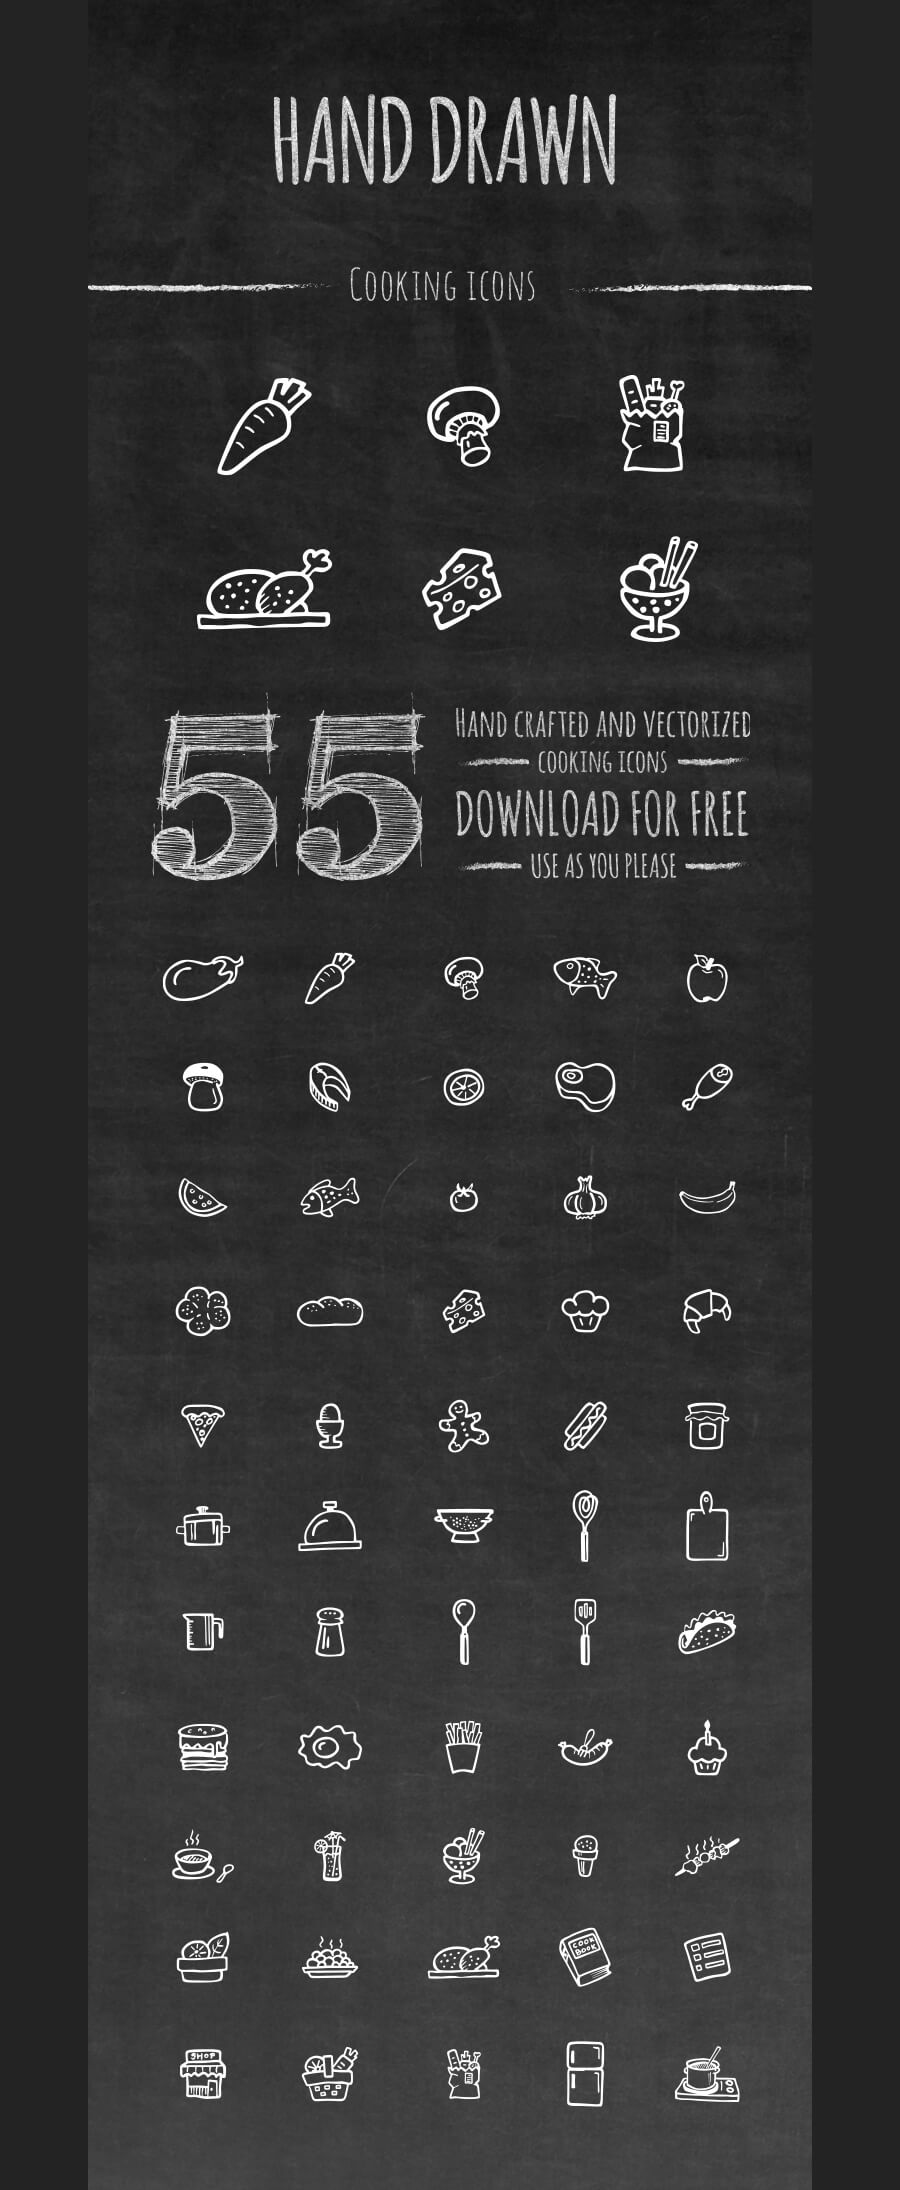 01_handdrawn-cooking-icons-set